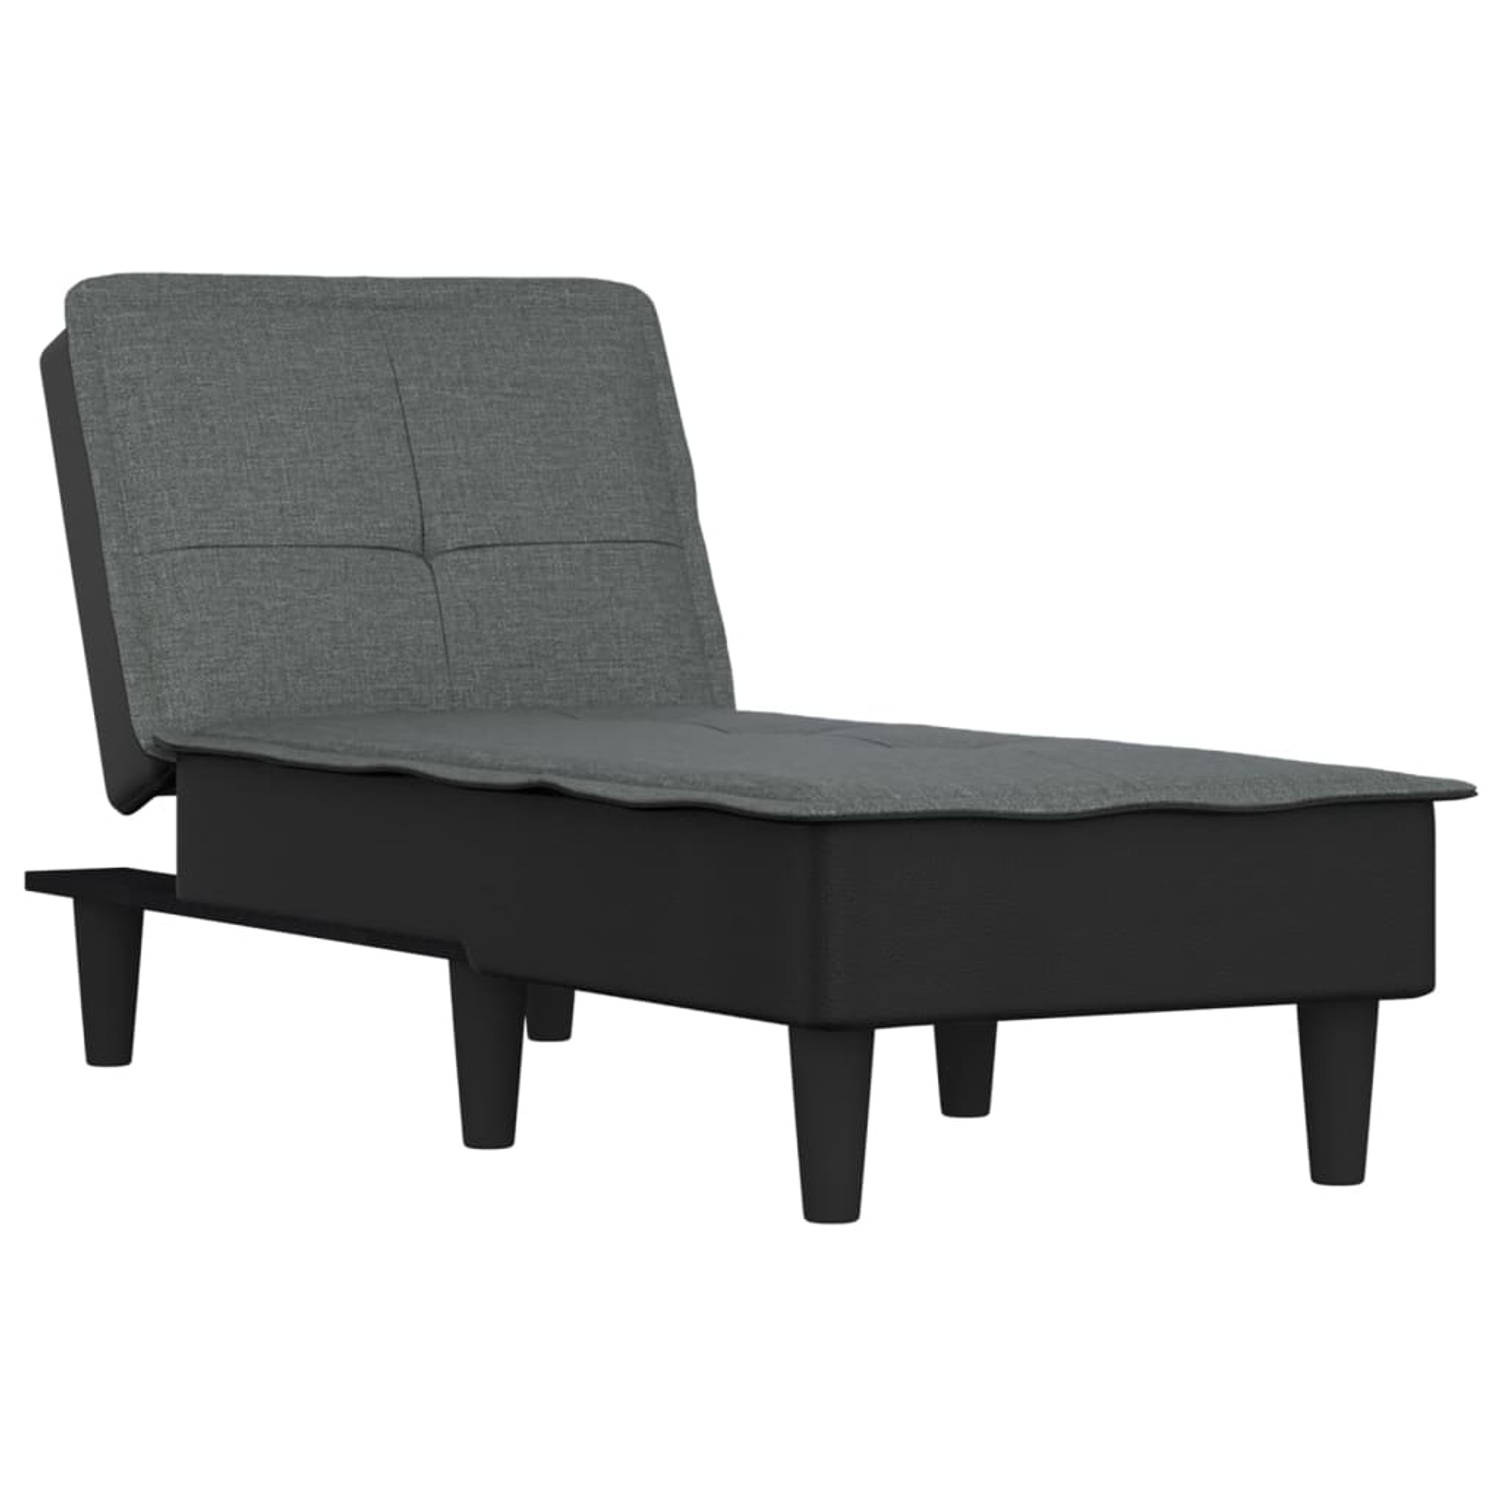 The Living Store Chaise longue stof donkergrijs - Chaise longue